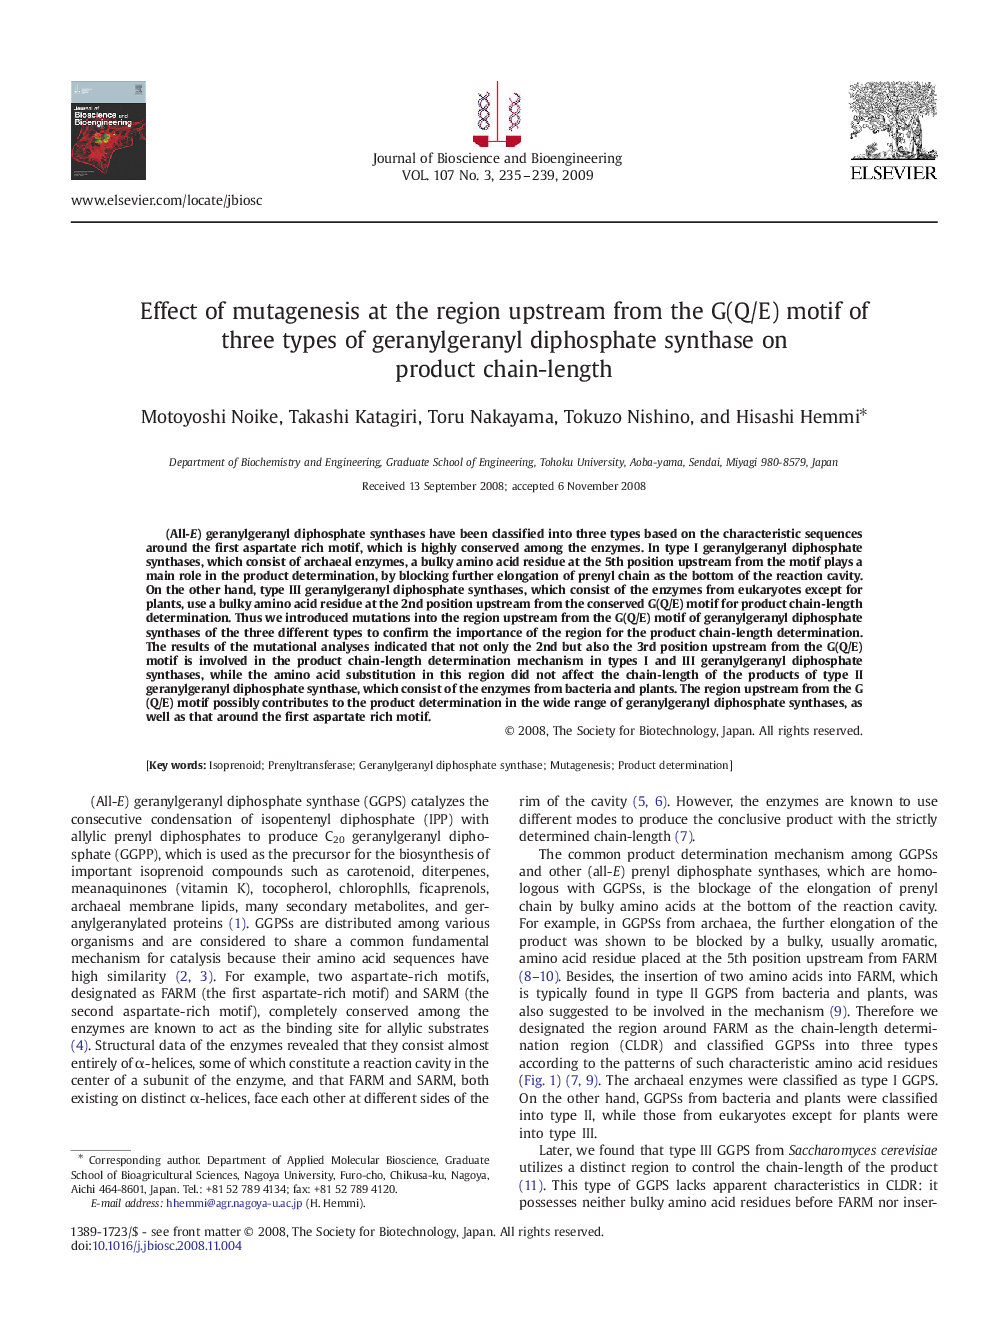 Effect of mutagenesis at the region upstream from the G(Q/E) motif of three types of geranylgeranyl diphosphate synthase on product chain-length